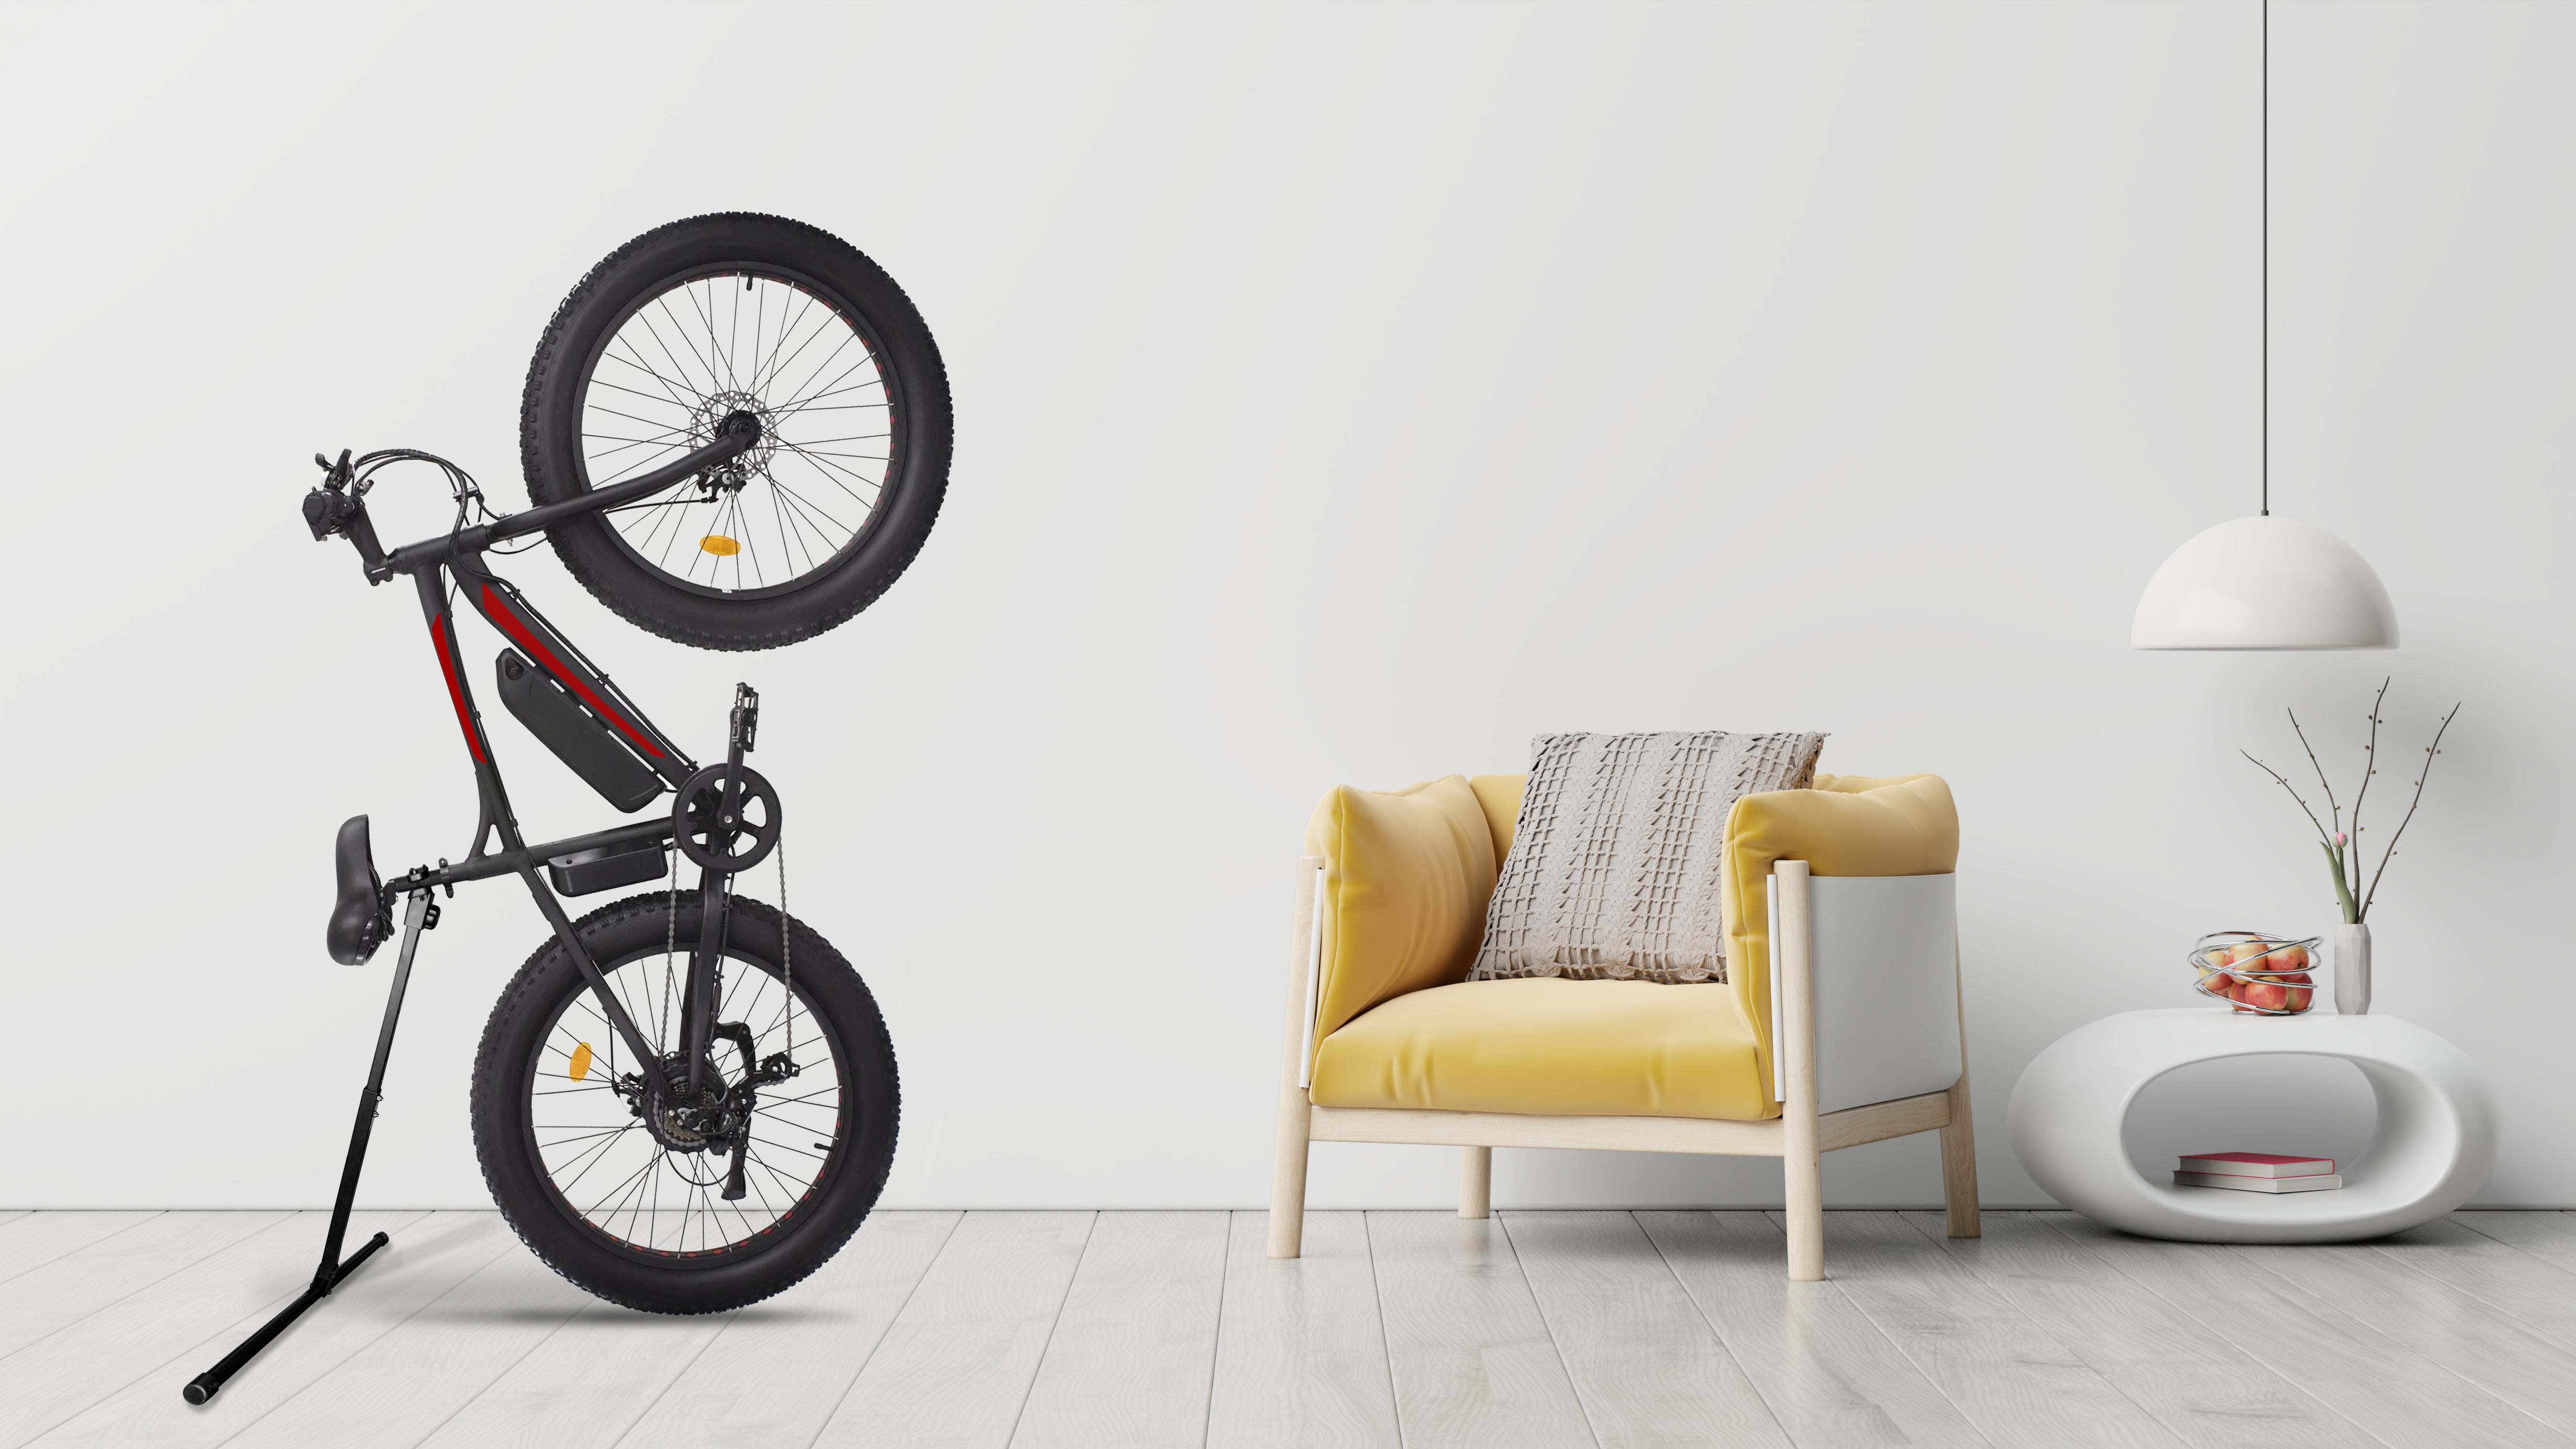  Bike Stand & Vertical Storage Rack by Bike Nook - The Original Vertical  Bicycle Floor Stand for Garage Storage and Indoor and Outdoor use, Perfect  Bike Accessories for Small Spaces with